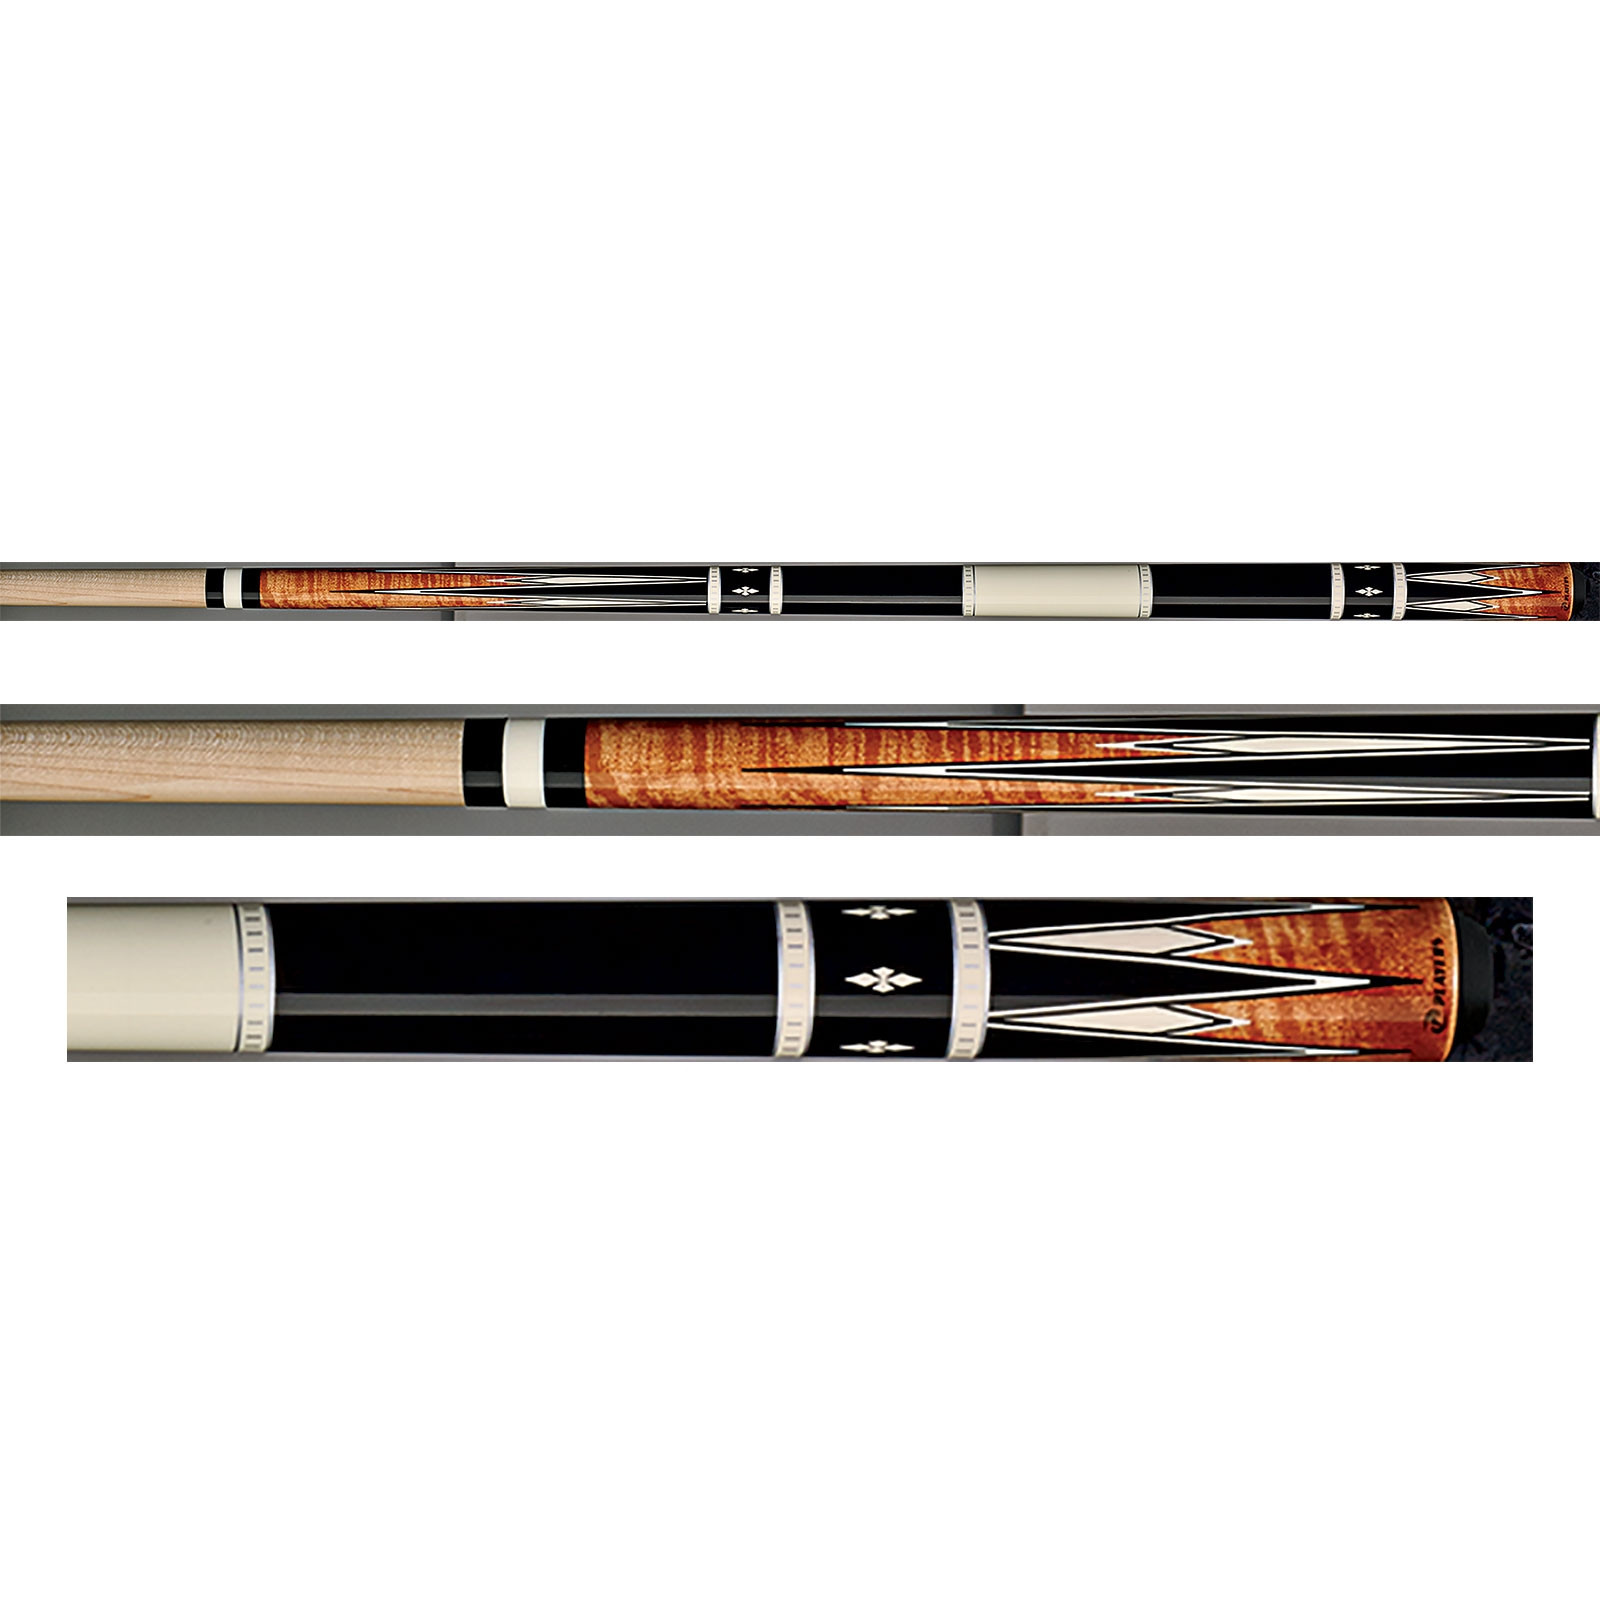 Players G-4115 Antique Brown Pool Cue Stick